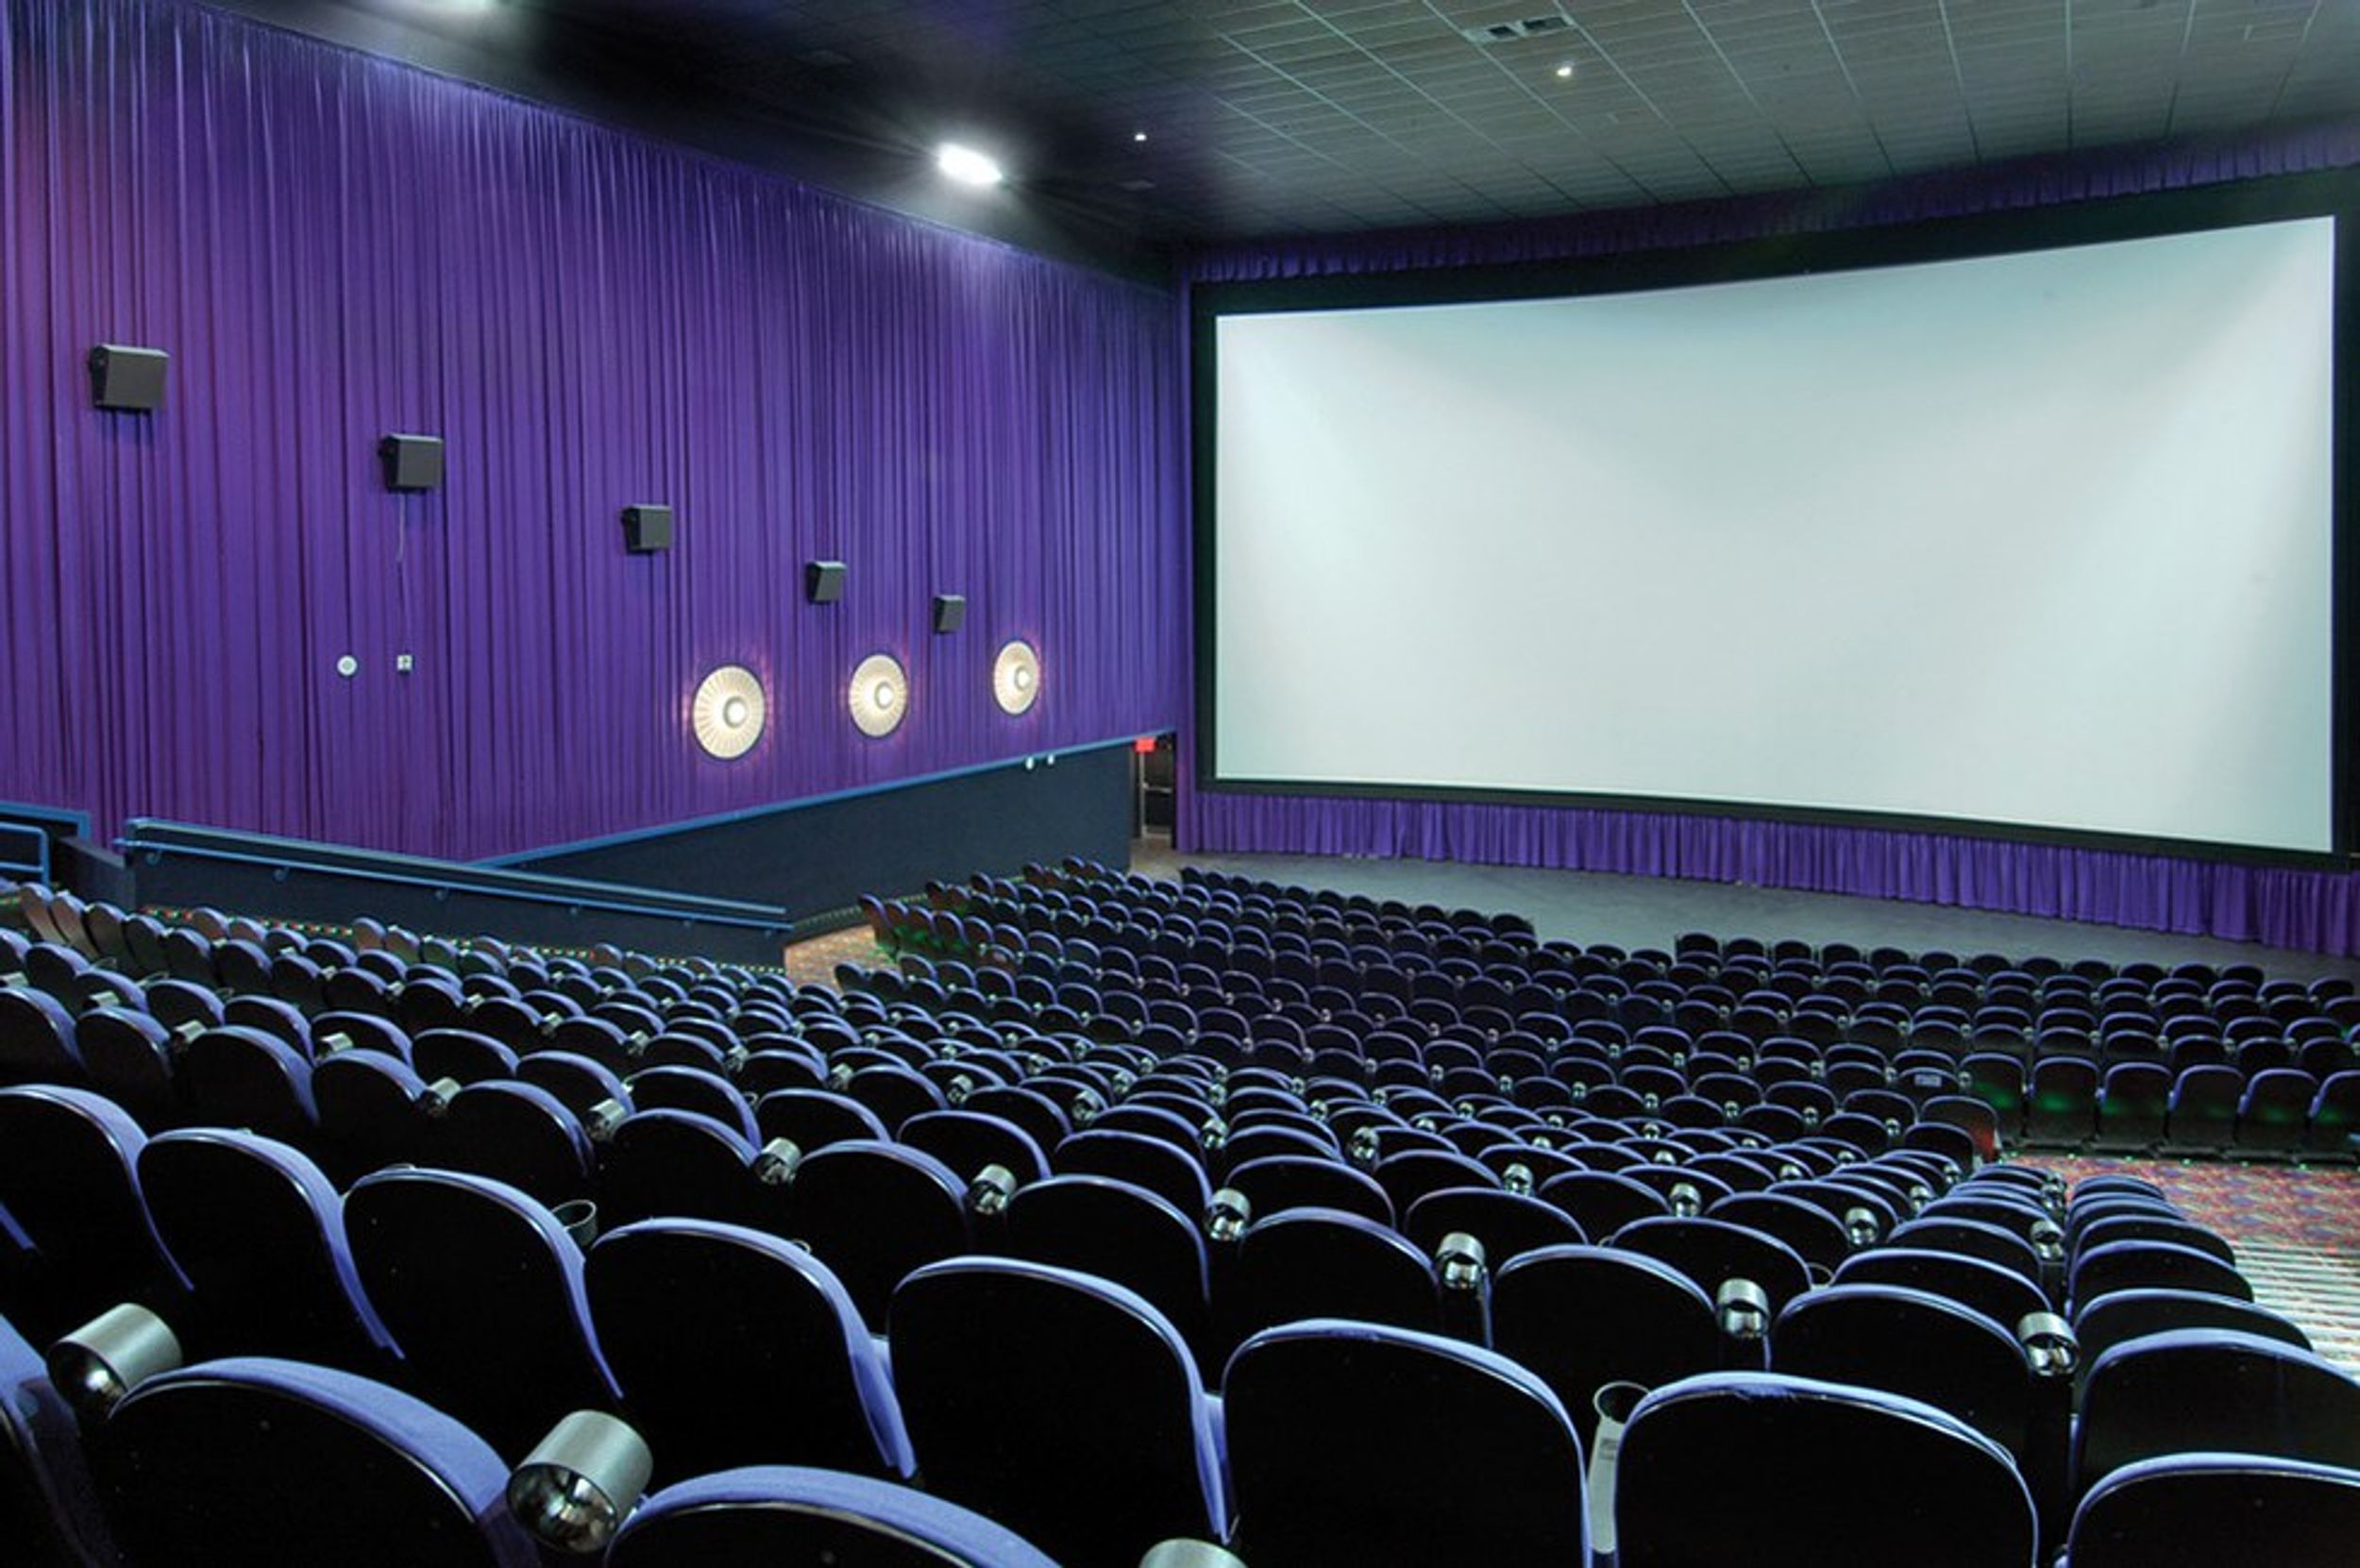 What You Need To Know Before Working At A Movie Theater